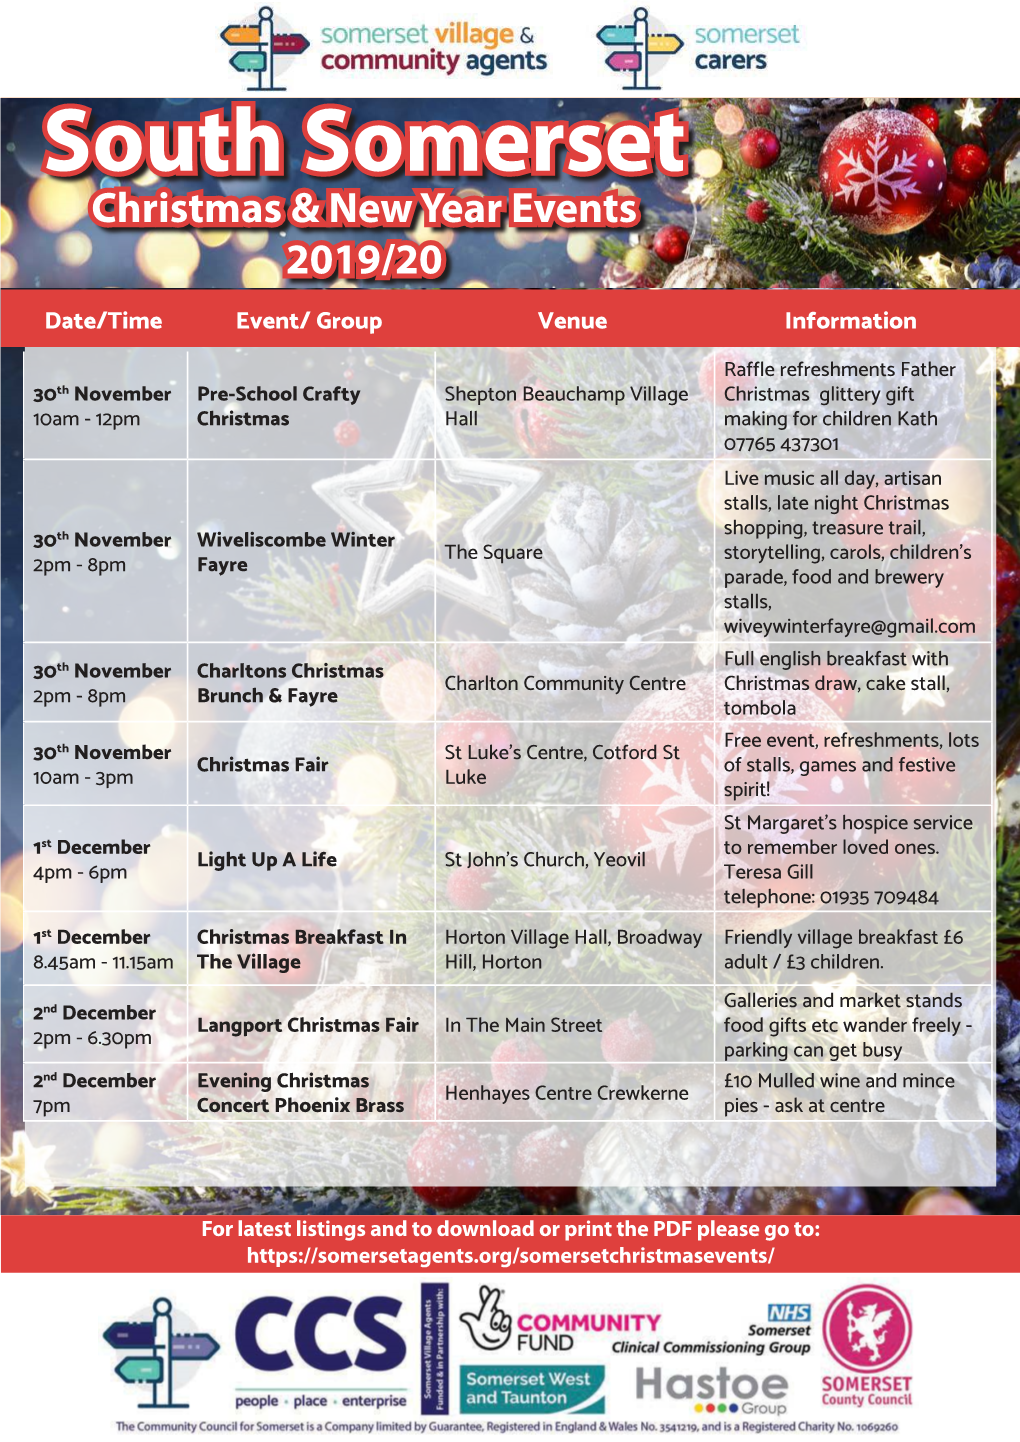 South Somerset Christmas & New Year Events 2019/20